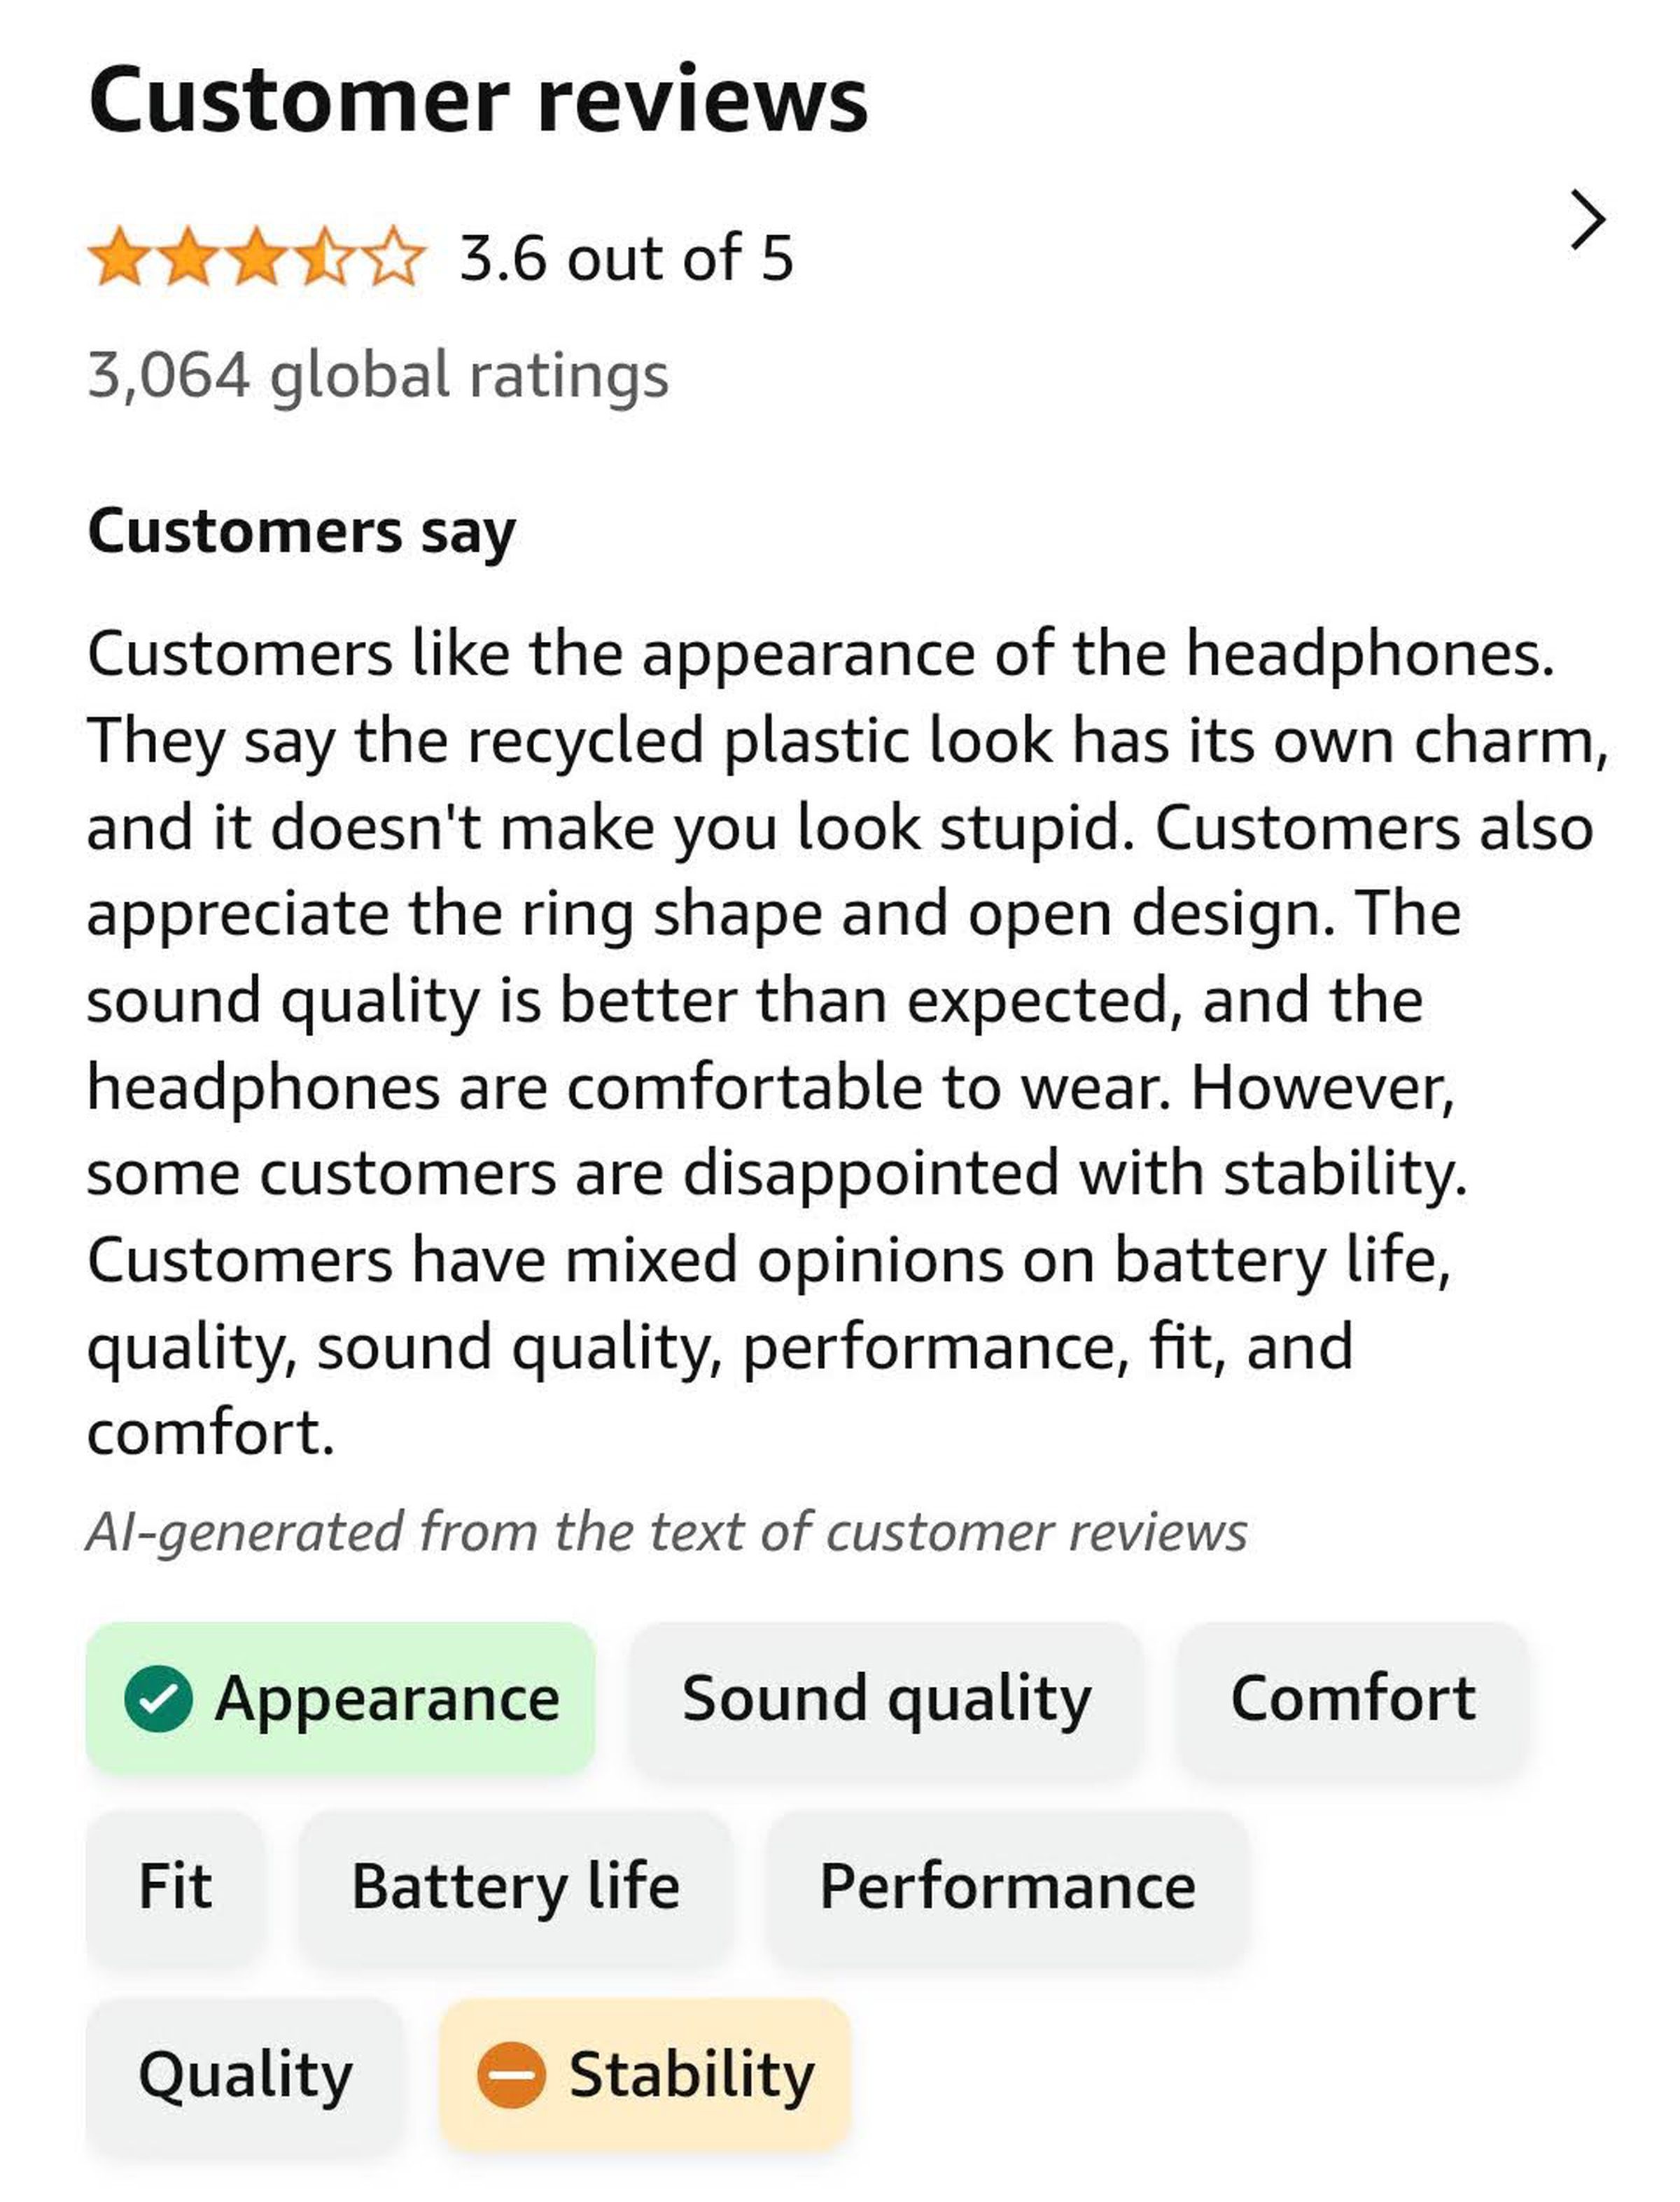 “Customers like the appearance of the headphones. They say the recycled plastic look has its own charm, and it doesn’t make you look stupid. Customers also appreciate the ring shape and open design. The sound quality is better than expected, and the headphones are comfortable to wear. However, some customers are disappointed with stability. Customers have mixed opinions on battery life, quality, sound quality, performance, fit, and comfort.”